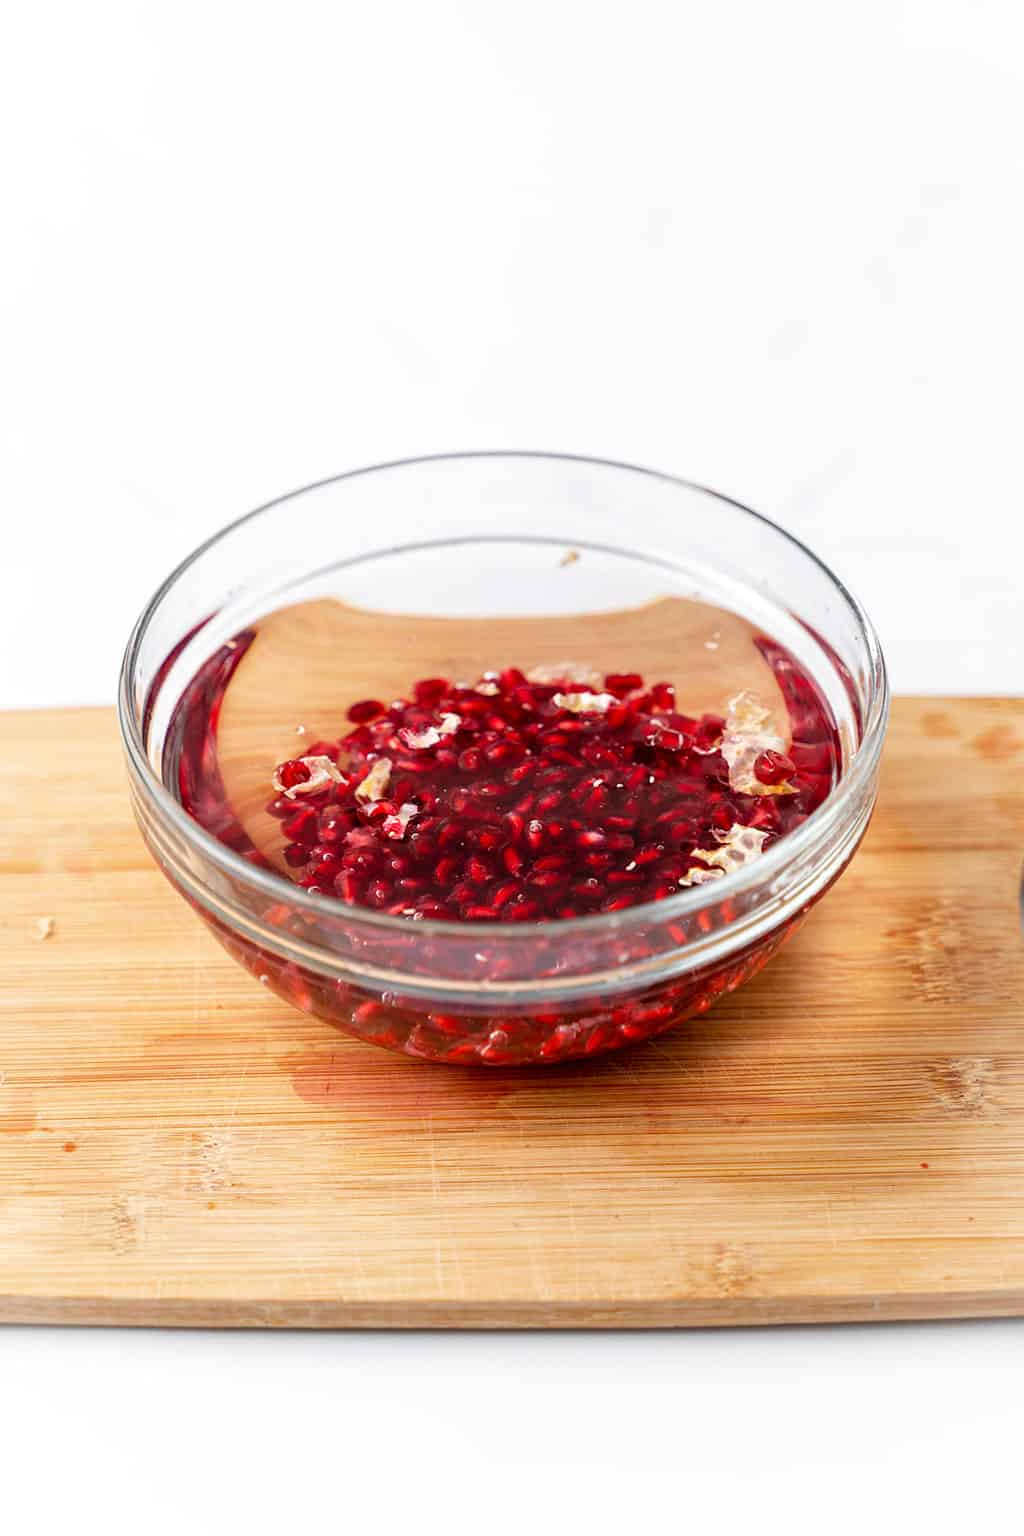 one bowl of pomegranate seeds in water 